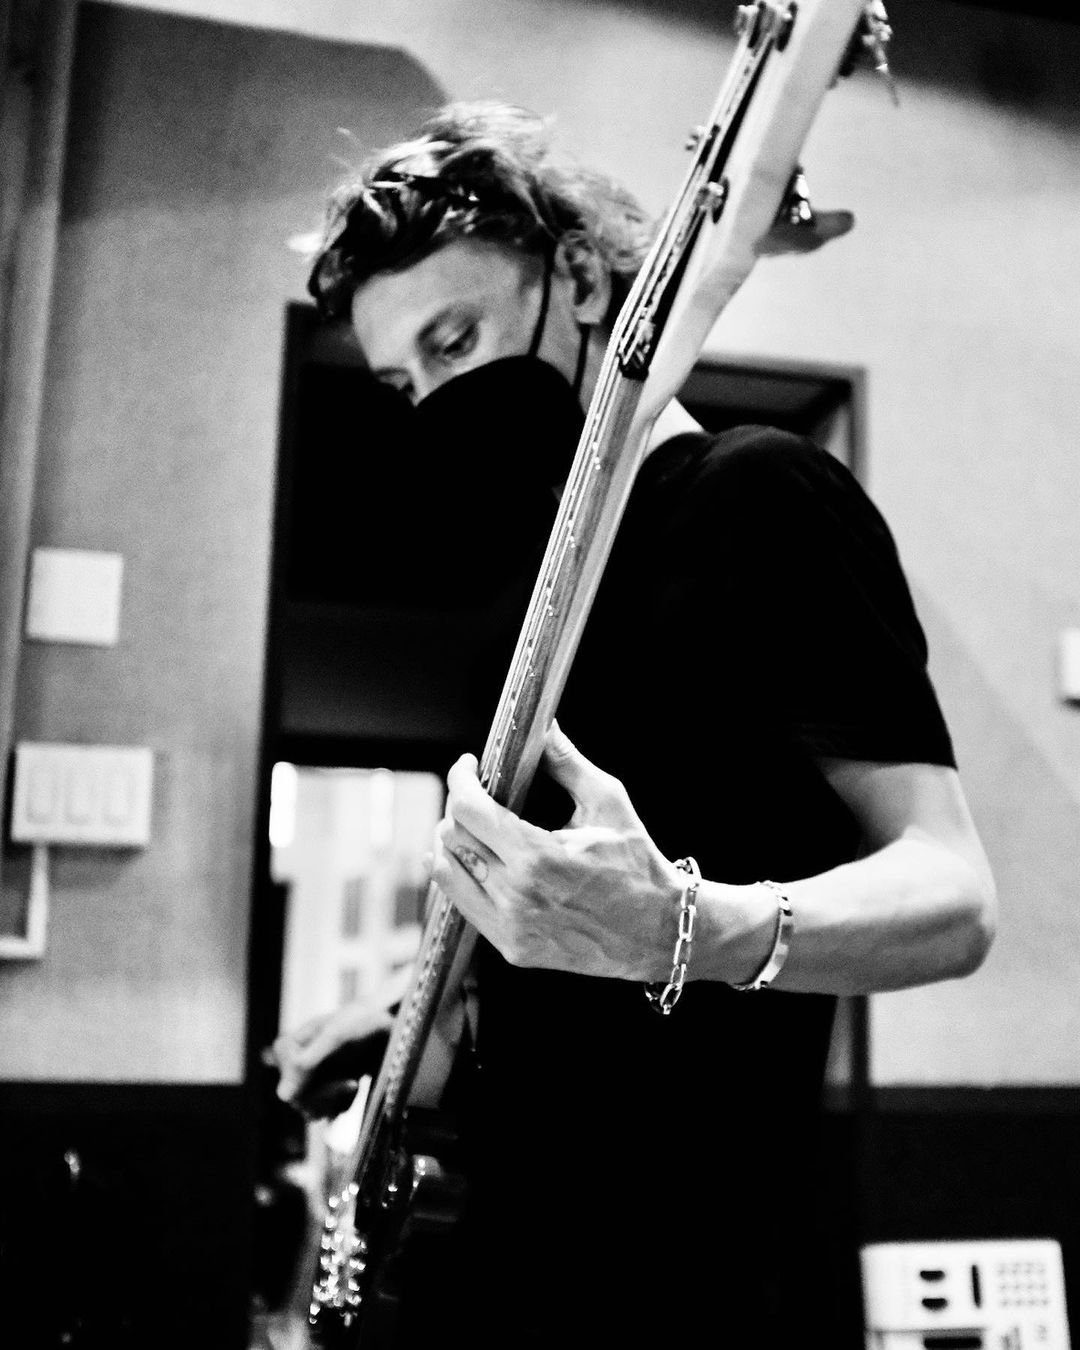 Jamie Bower with a guitar